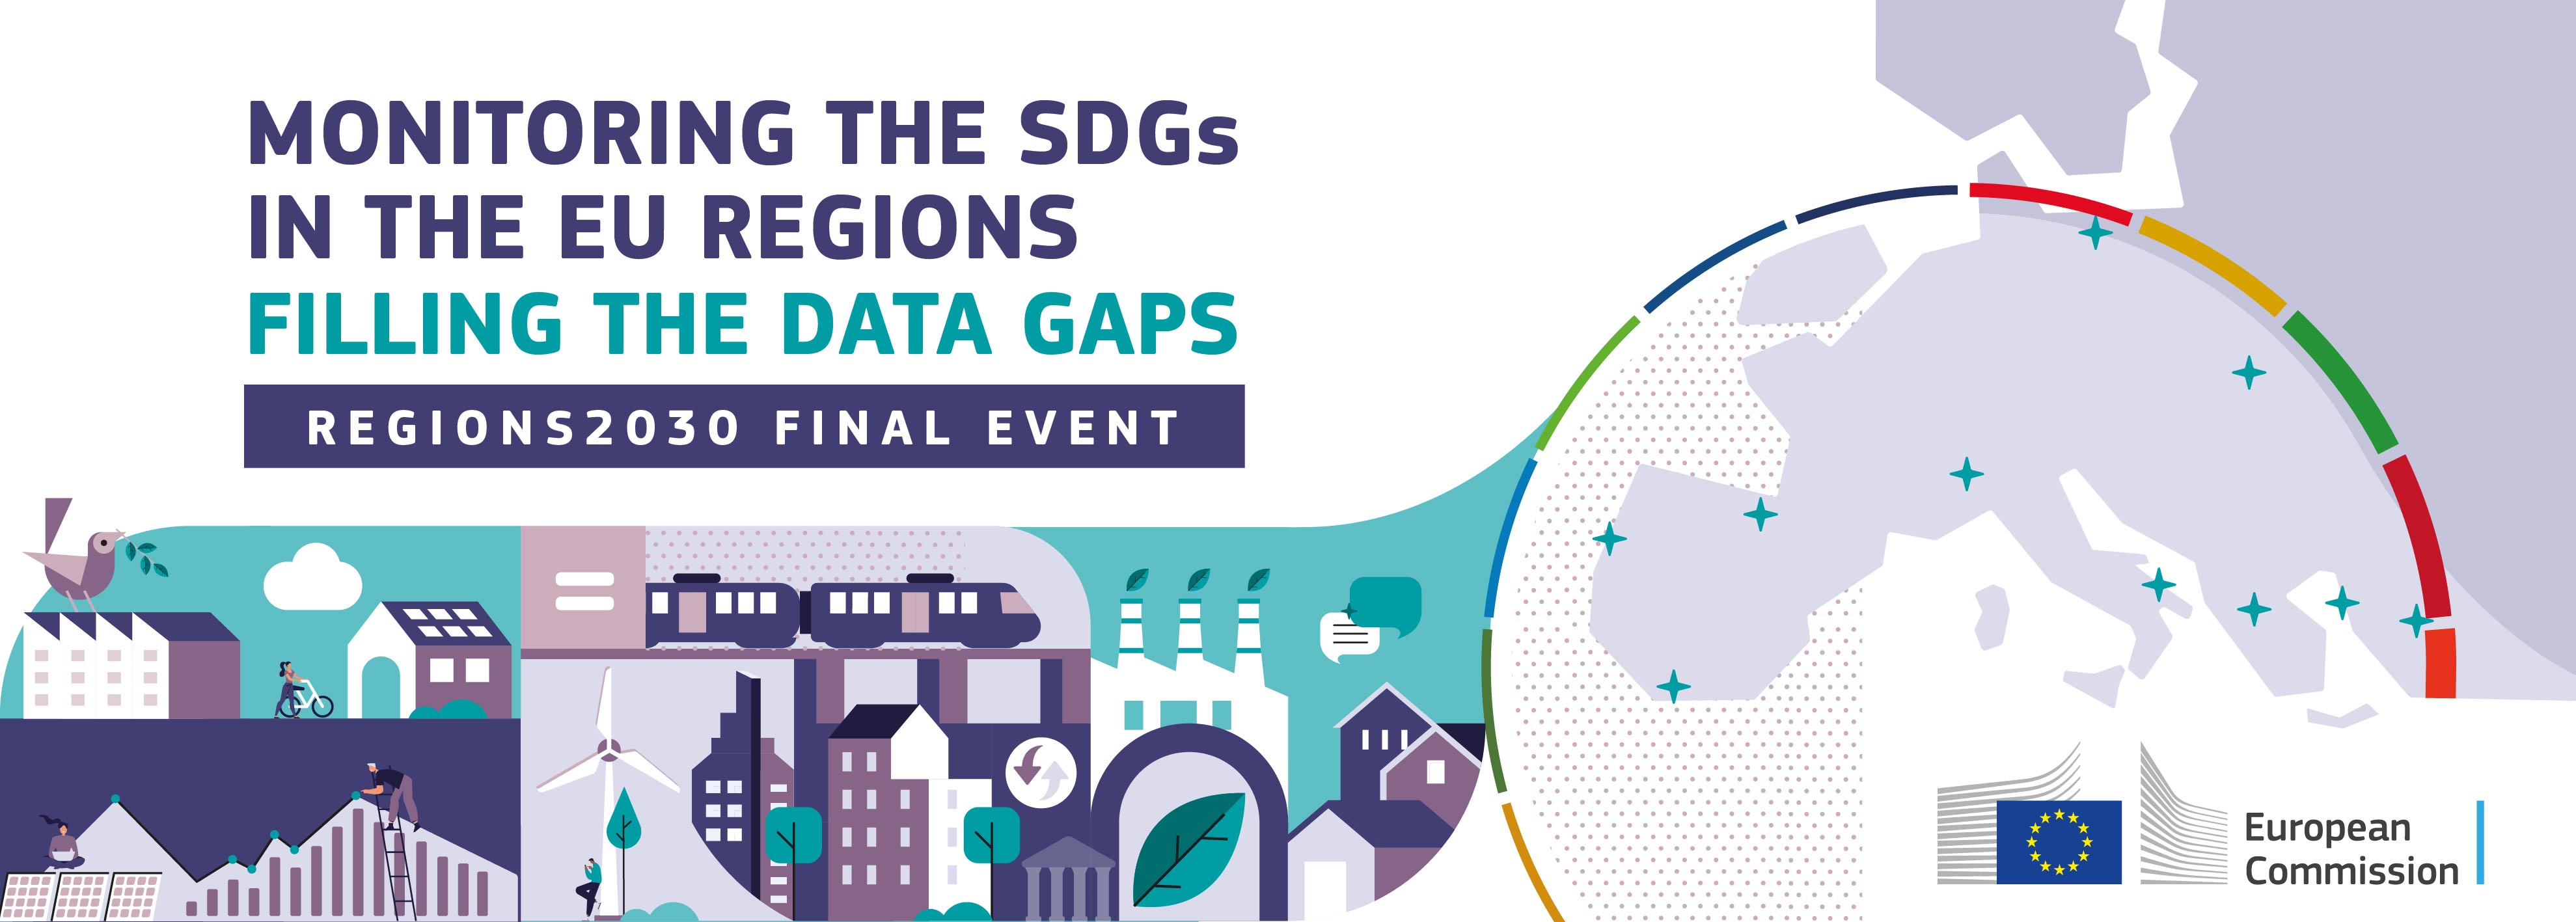 Final Event Monitoring the SDGs in the EU regions - filling the data gaps